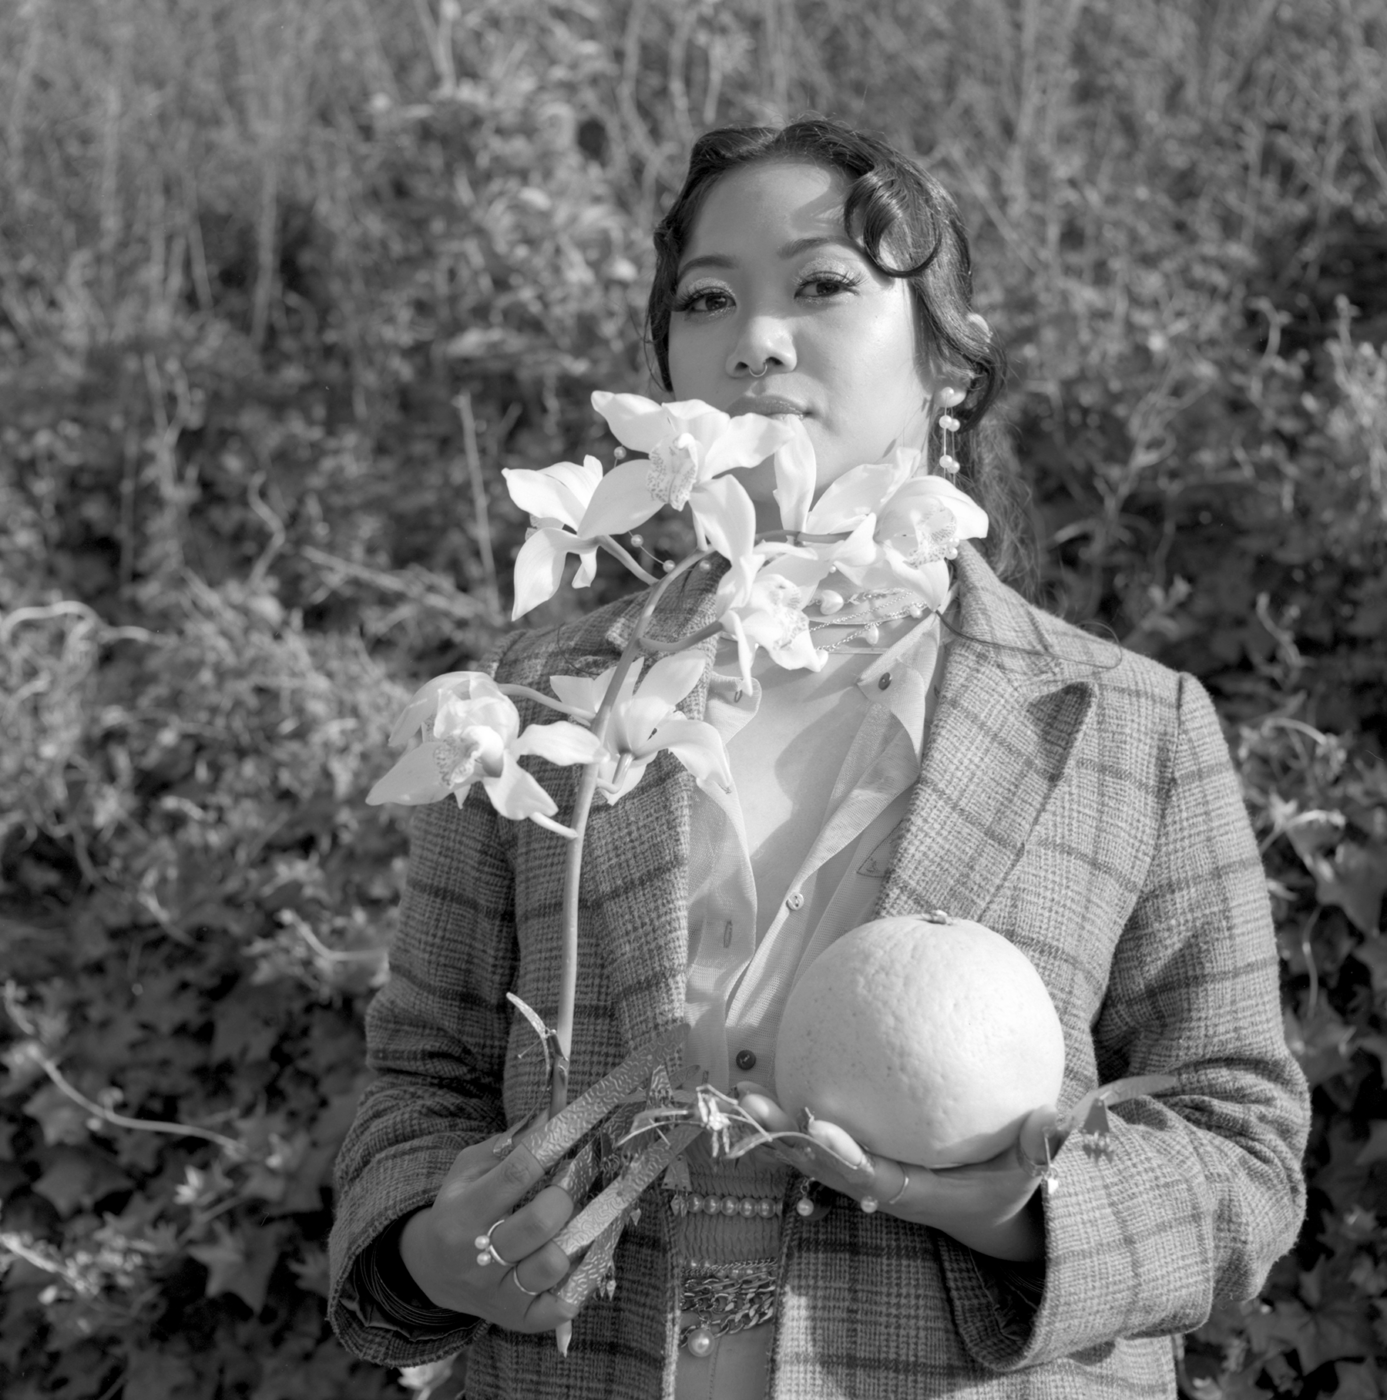 b&w image of Kim, standing against tall grass, holding and orchid plant in one hand hat partially covers her face, and a pomelo in the other. She's wearing a checked coat and has stylized makeup and slicked hair.